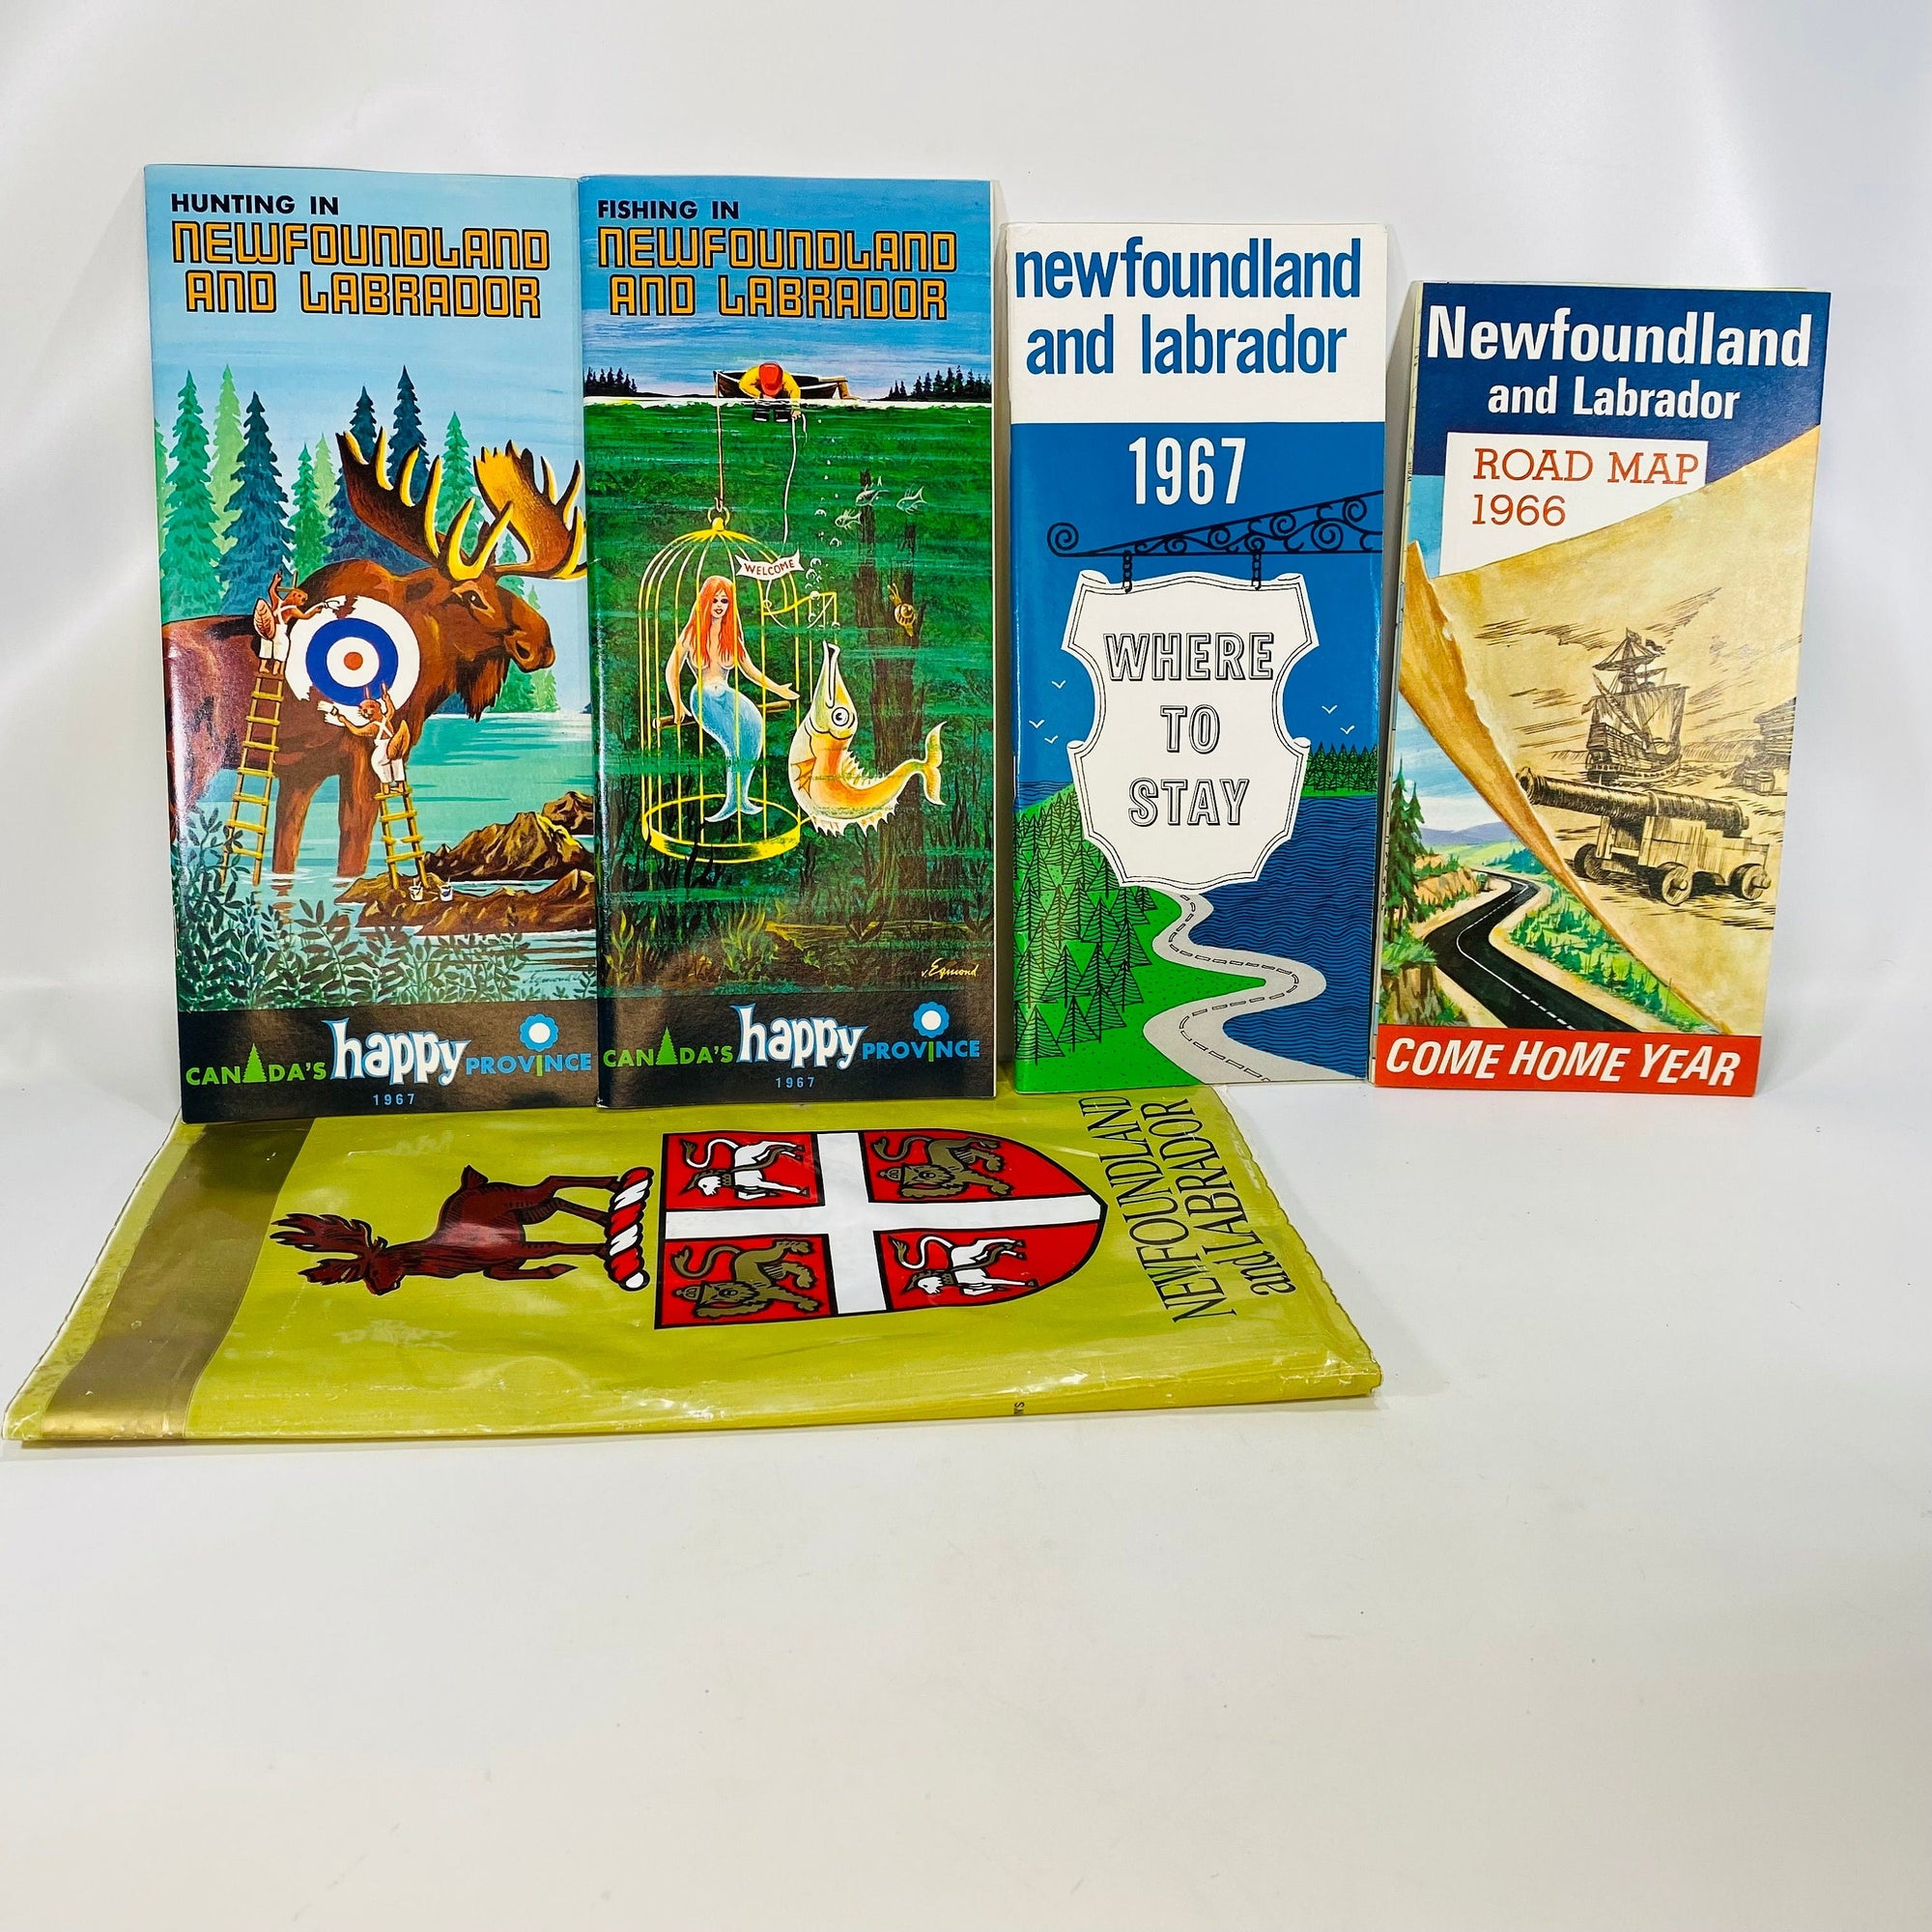 Vintage Newfoundland and Labrador Canada Vacation Planning Pack from 1966-67 Maps & Fishing Guides Vintage Book